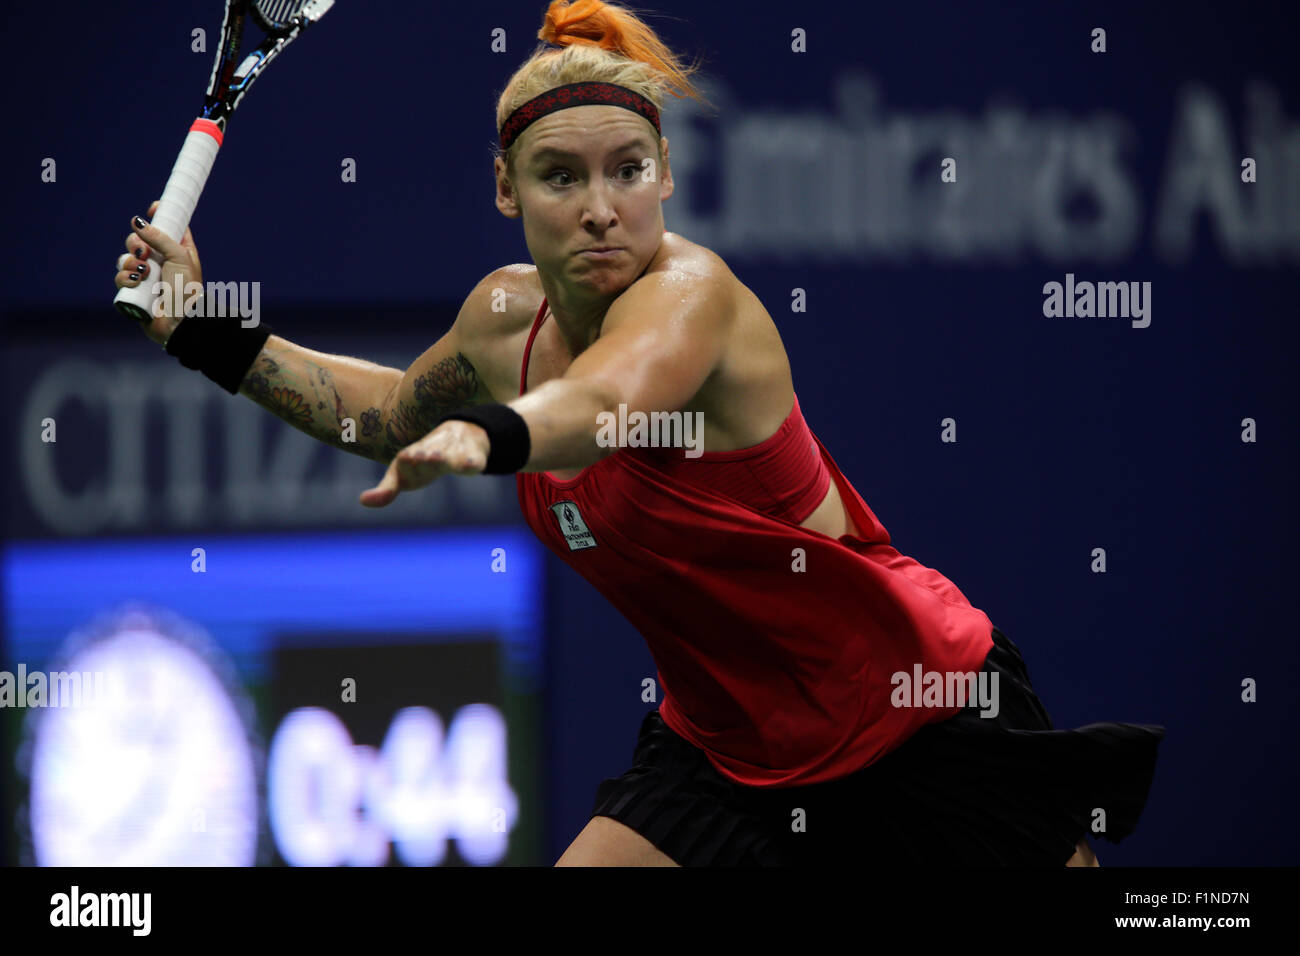 New York, USA. 4th September, 2015. Bethanie Mattek-Sands during her third round match against Serena Williams at the U.S. Open in Flushing Meadows, New York on September 4th, 2015.  Williams won the match in three sets after losing the first set to Mattek-Sands. Credit:  Adam Stoltman/Alamy Live News Stock Photo